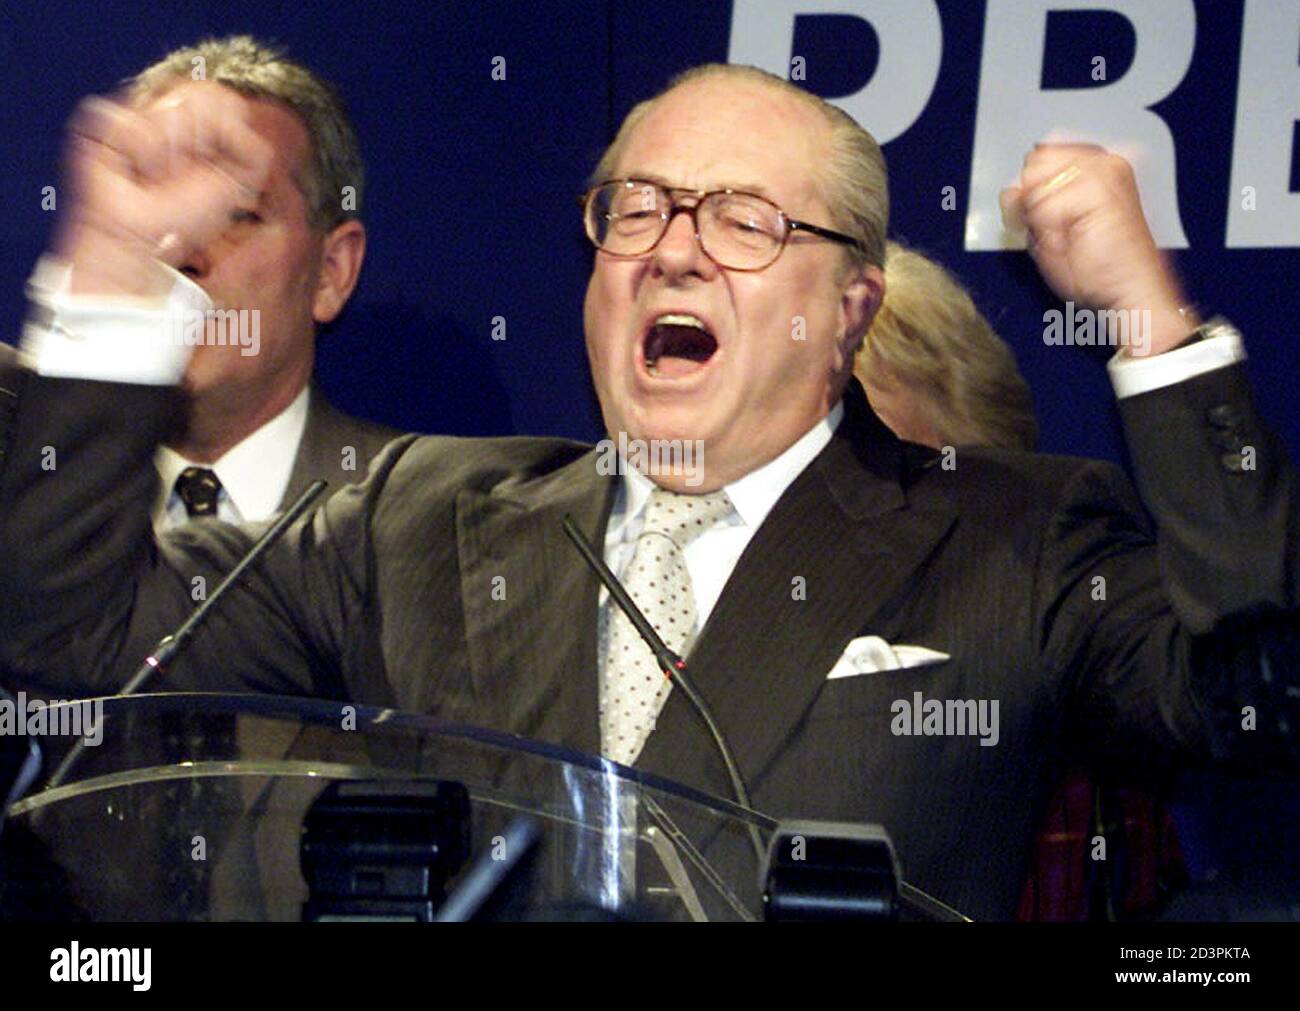 French extreme right National Front party leader Jean-Marie le Pen  addresses supporters at his campaign headquarters in Saint Cloud near  Paris, April 21, 2002 after beating French socialist Prime Minister Lionel  Jospin